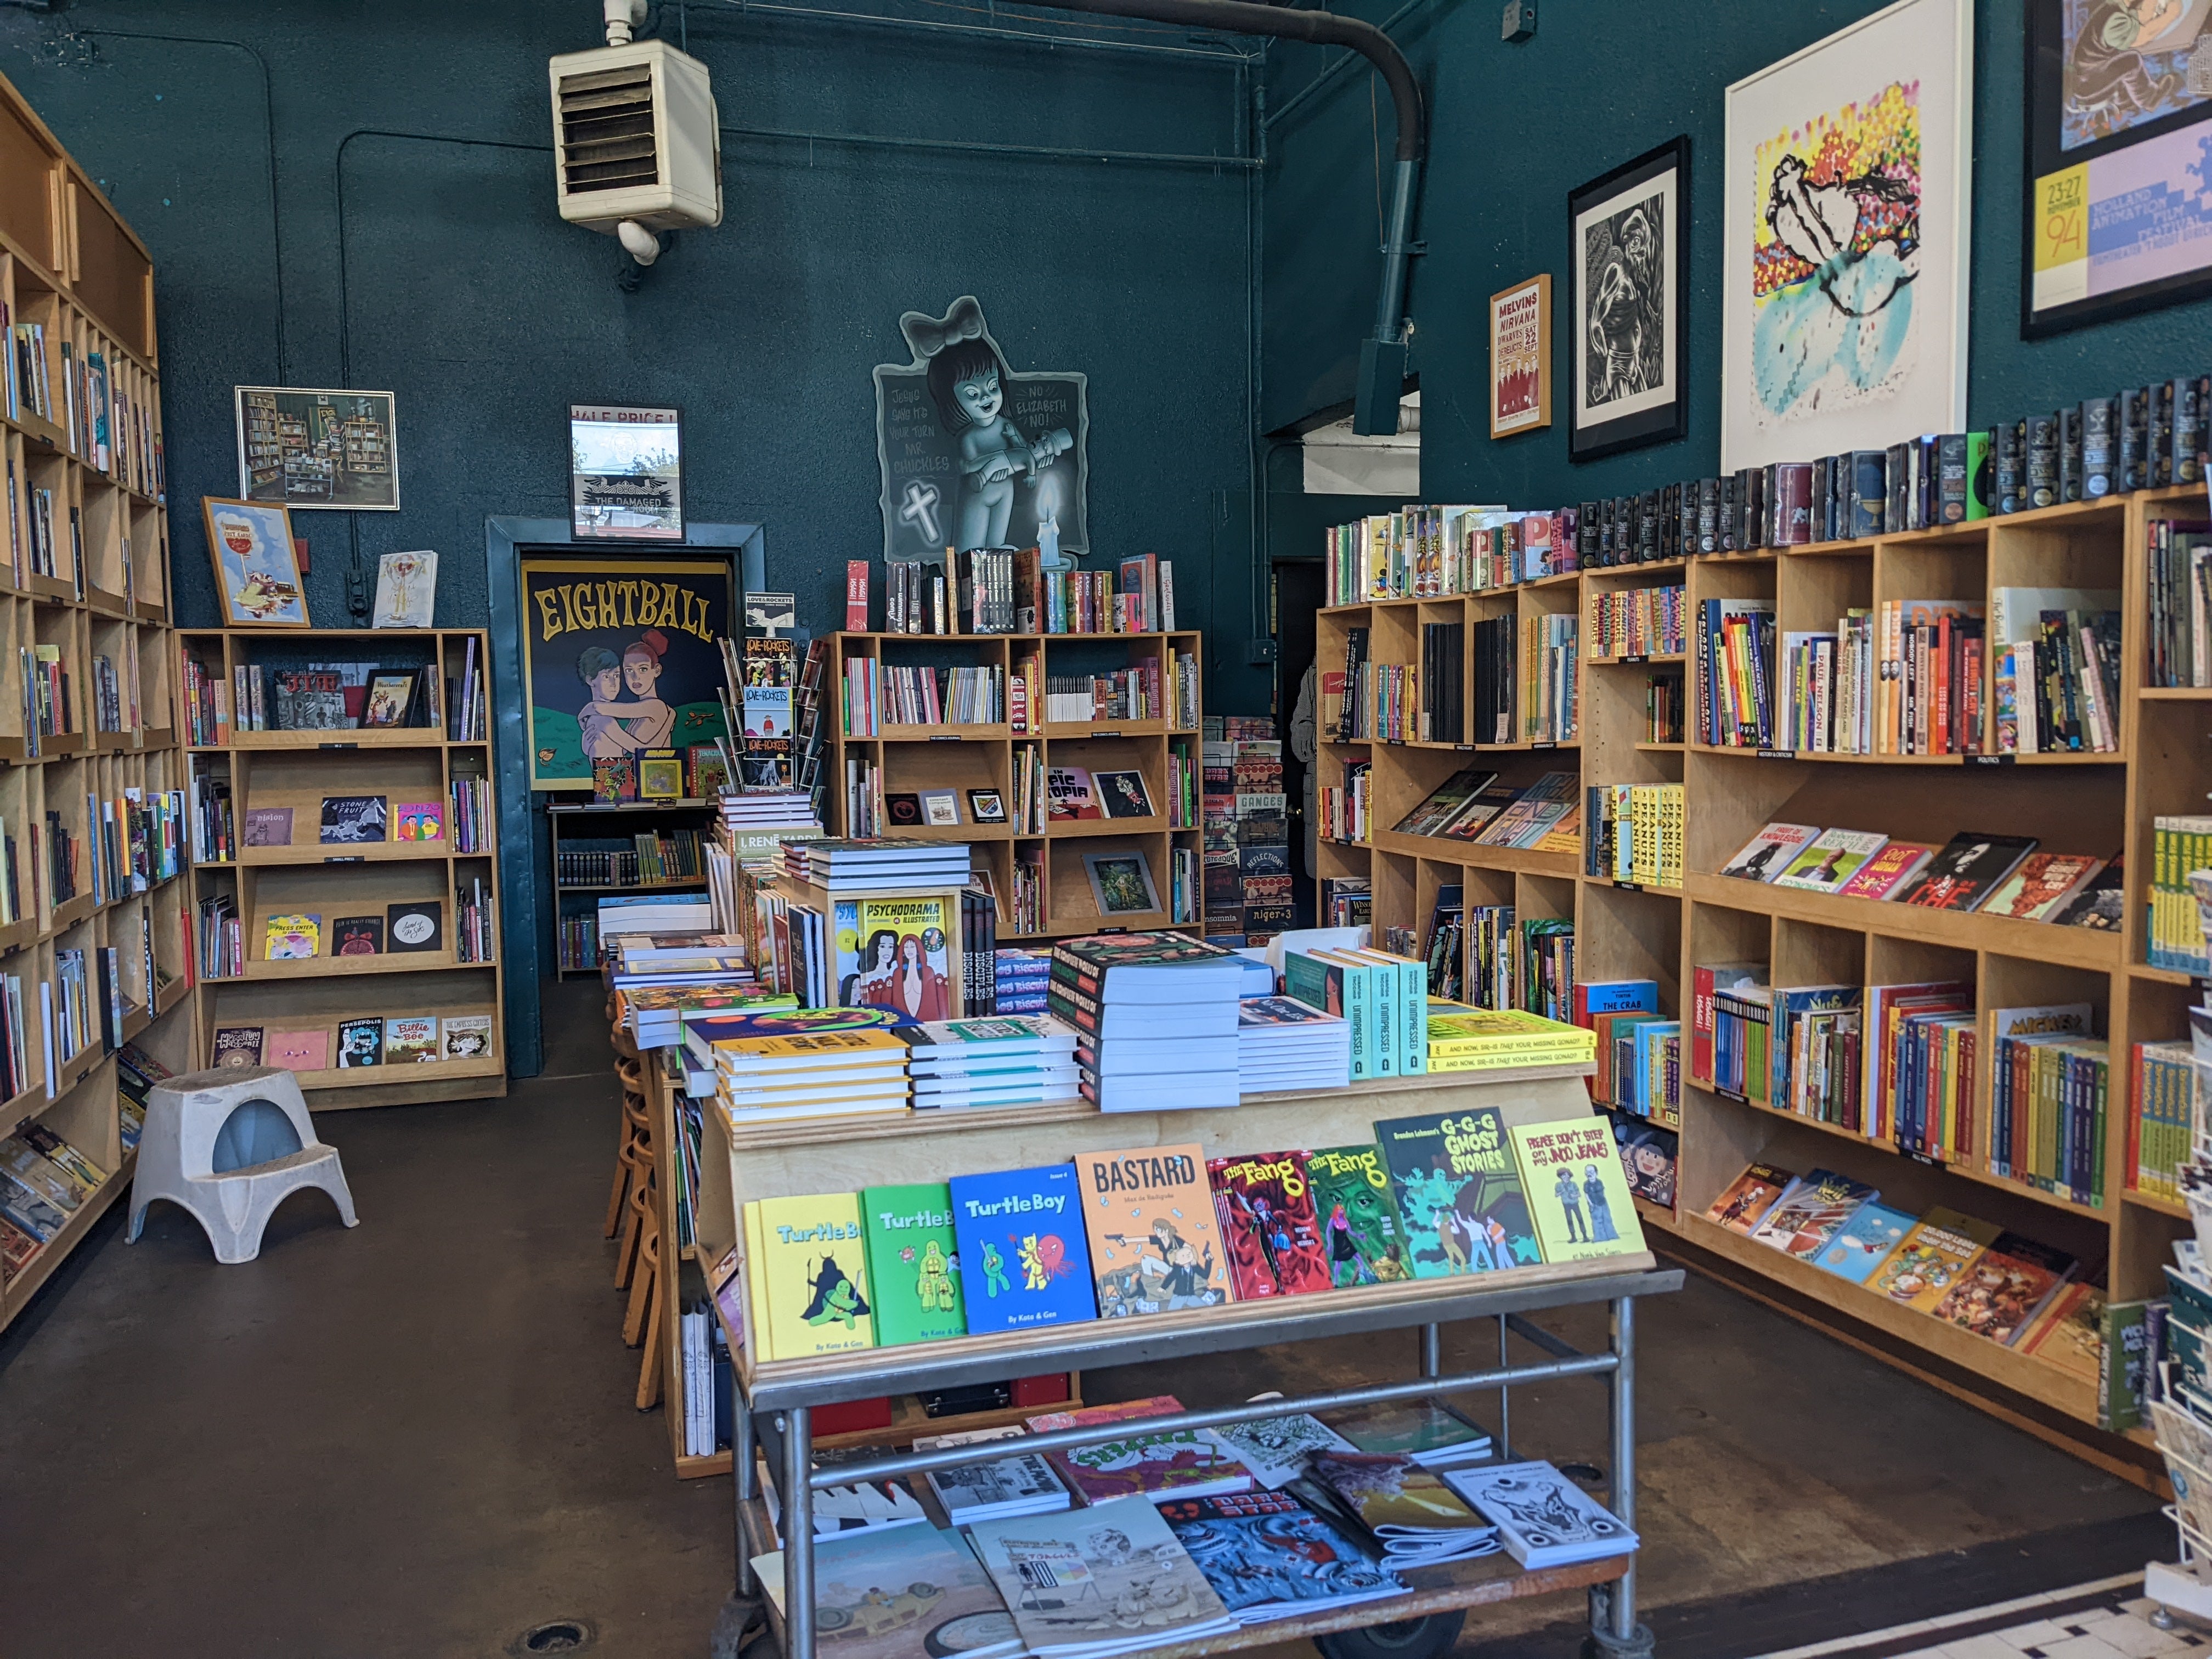 Photograph of the interior of a bookstore with blue walls